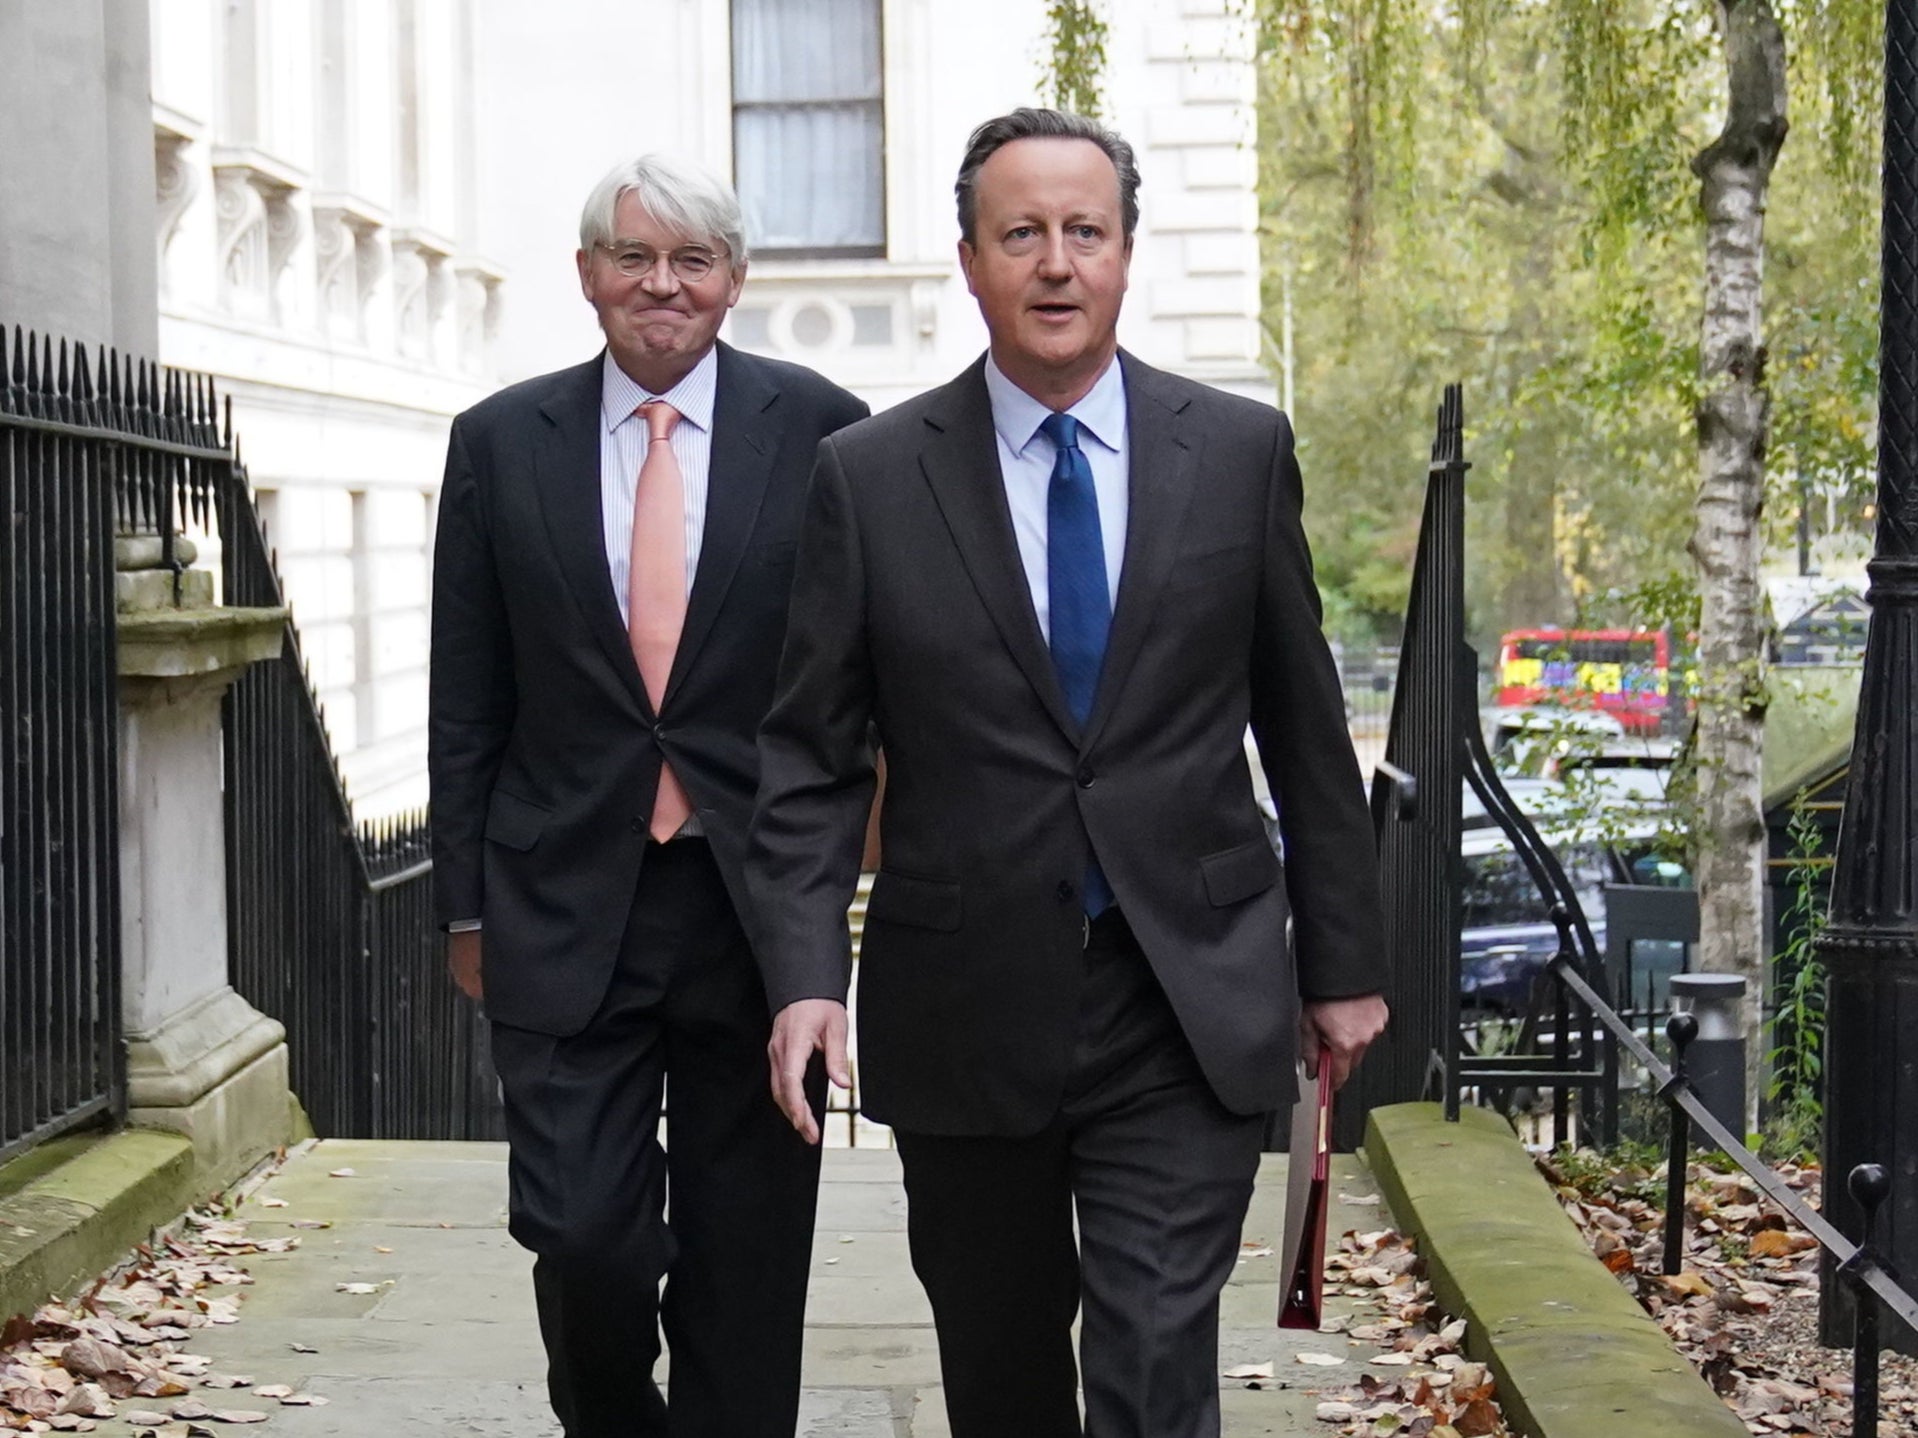 Lord Cameron arrives in Downing Street – accompanied by international development secretary Andrew Mitchell – for his first Cabinet meeting as foreign secretary